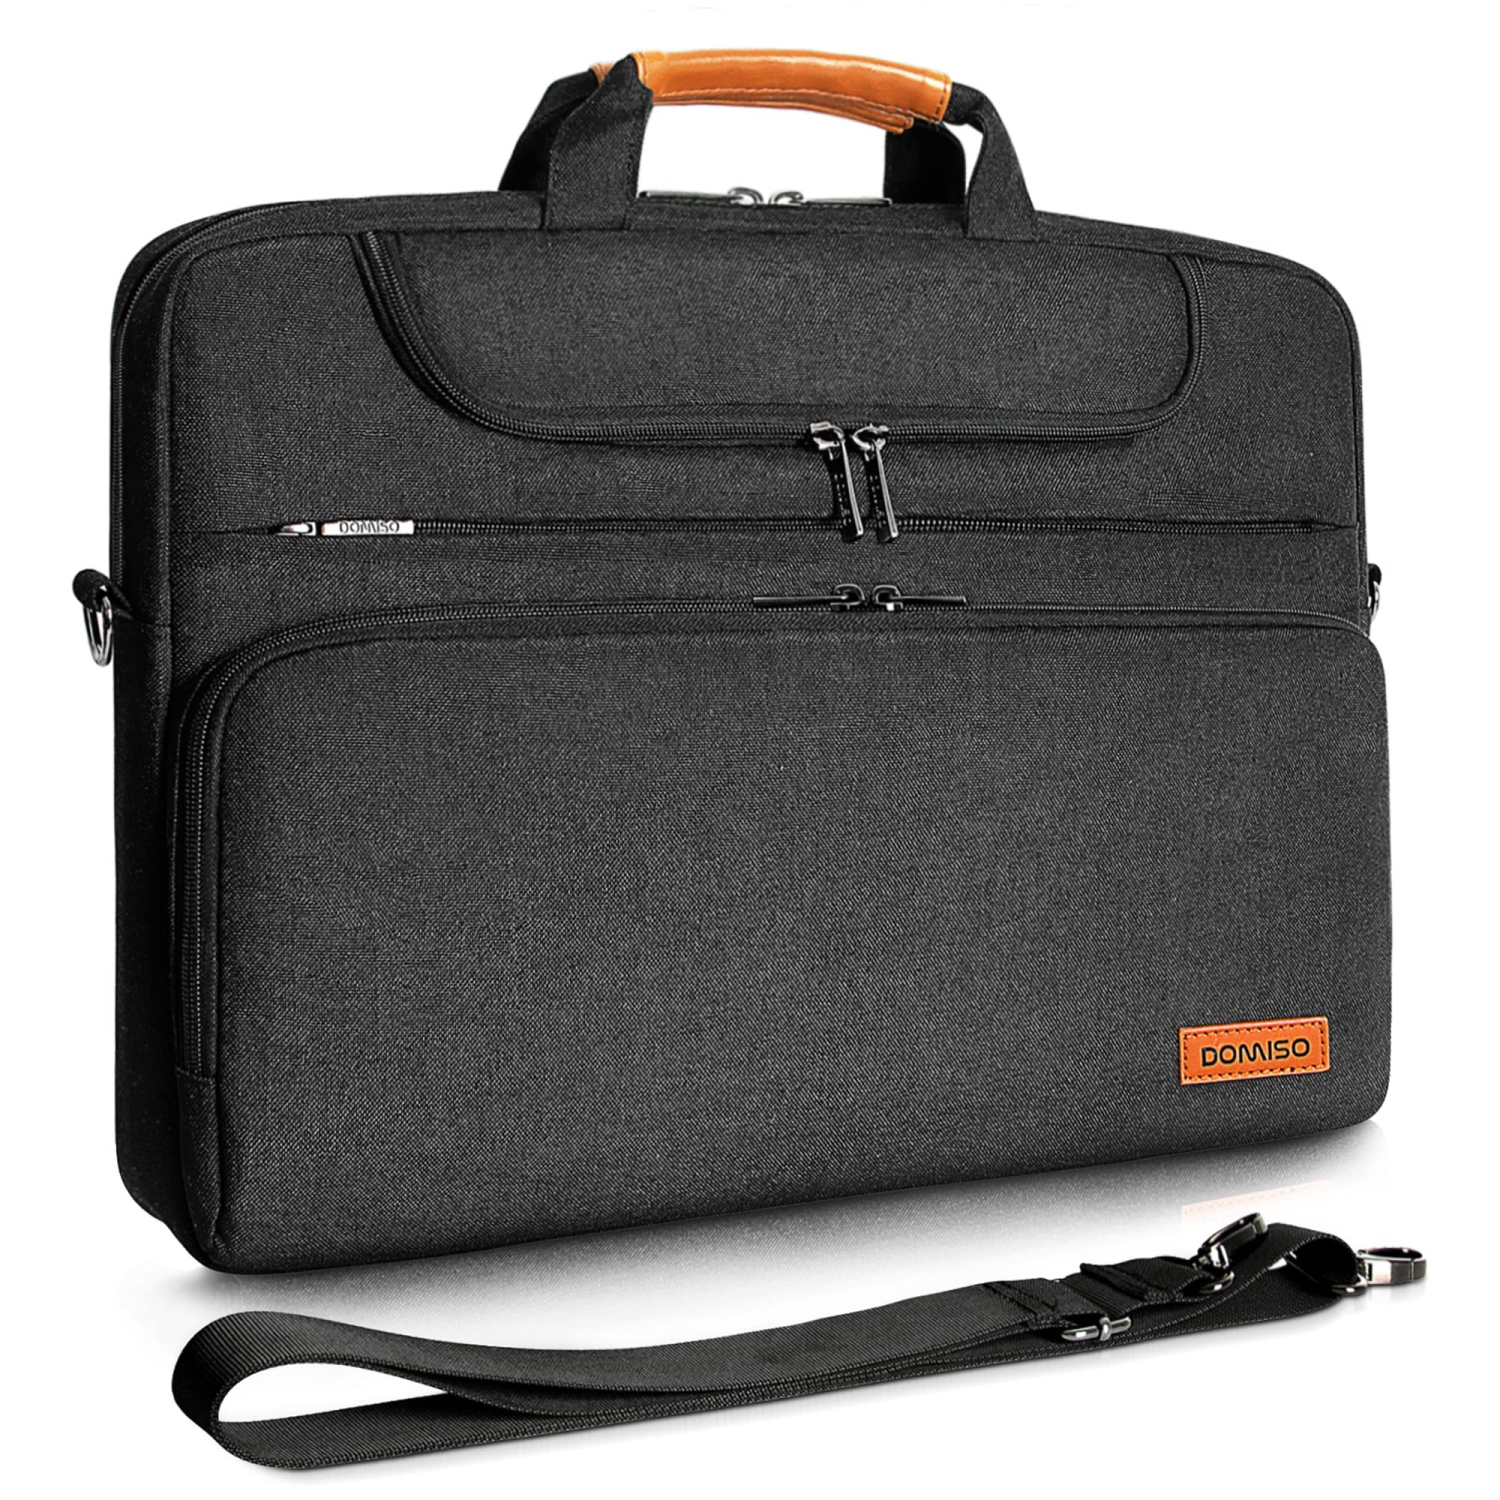 DOMISO 17 Inch Multi-Functional Laptop Sleeve Business Briefcase Waterproof Messenger Shoulder Bag Compatible with 17"-17.3"